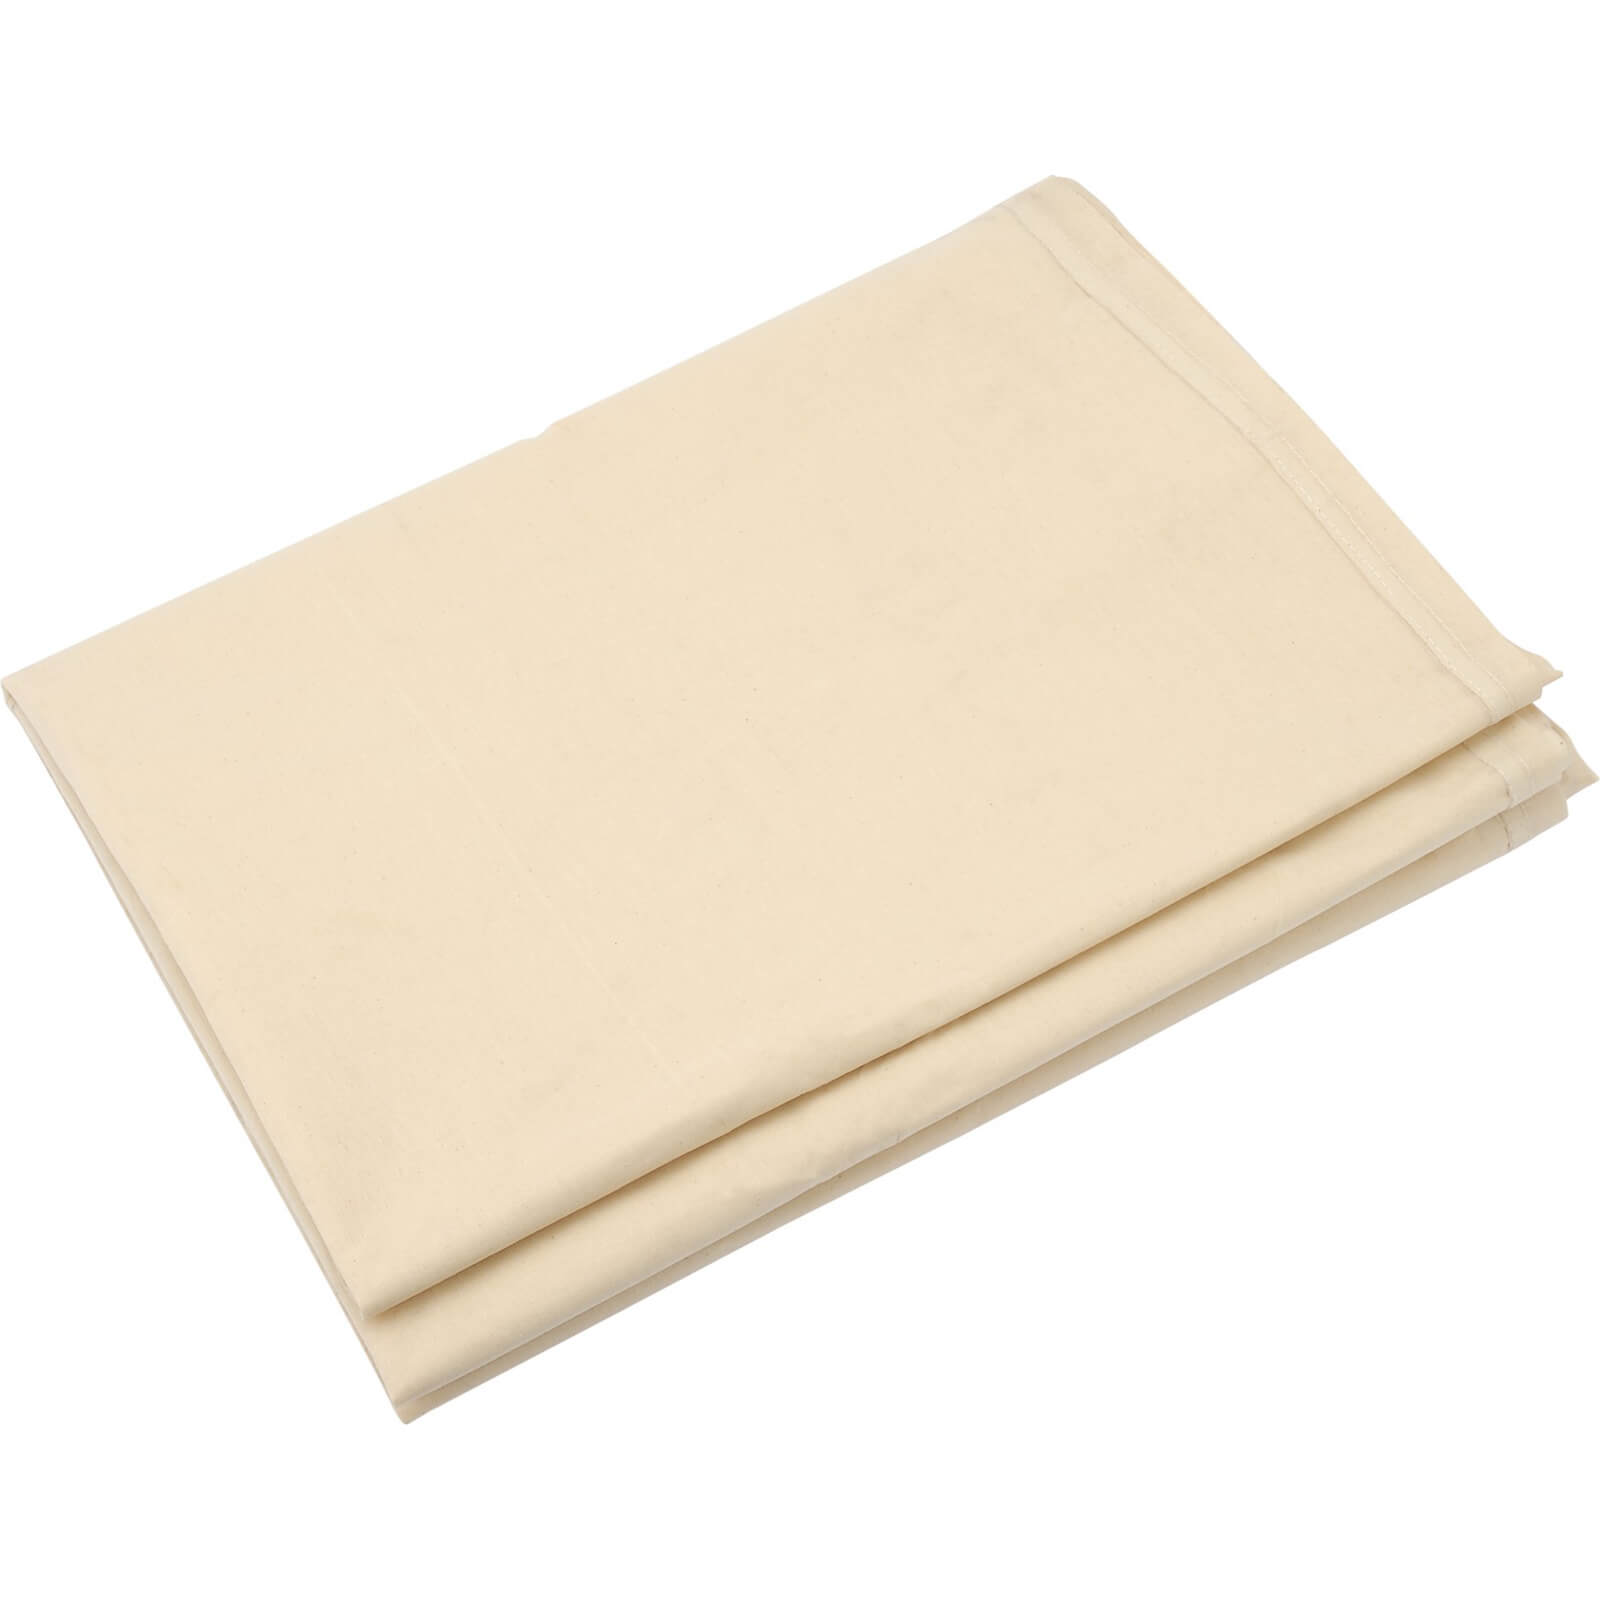 Image of Draper Laminated Cotton Dust Sheet 3.6m 2.7m Pack of 1